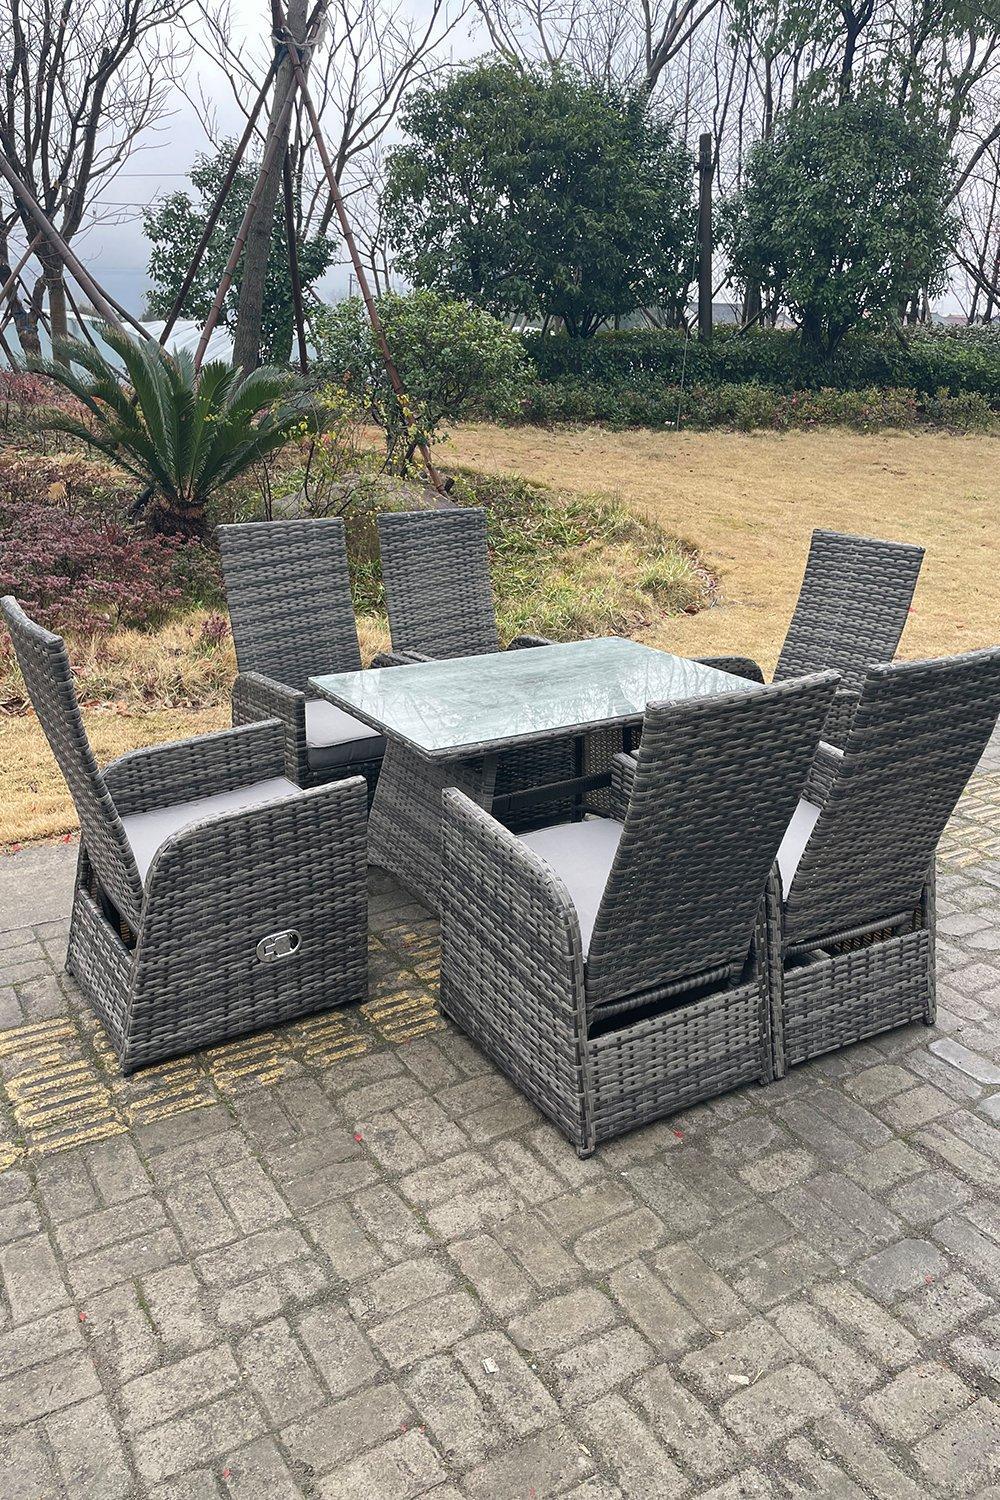 Fimous Oblong Adjustable Rattan Dining Set Table And Chair Set Outdoor Seat|dark grey